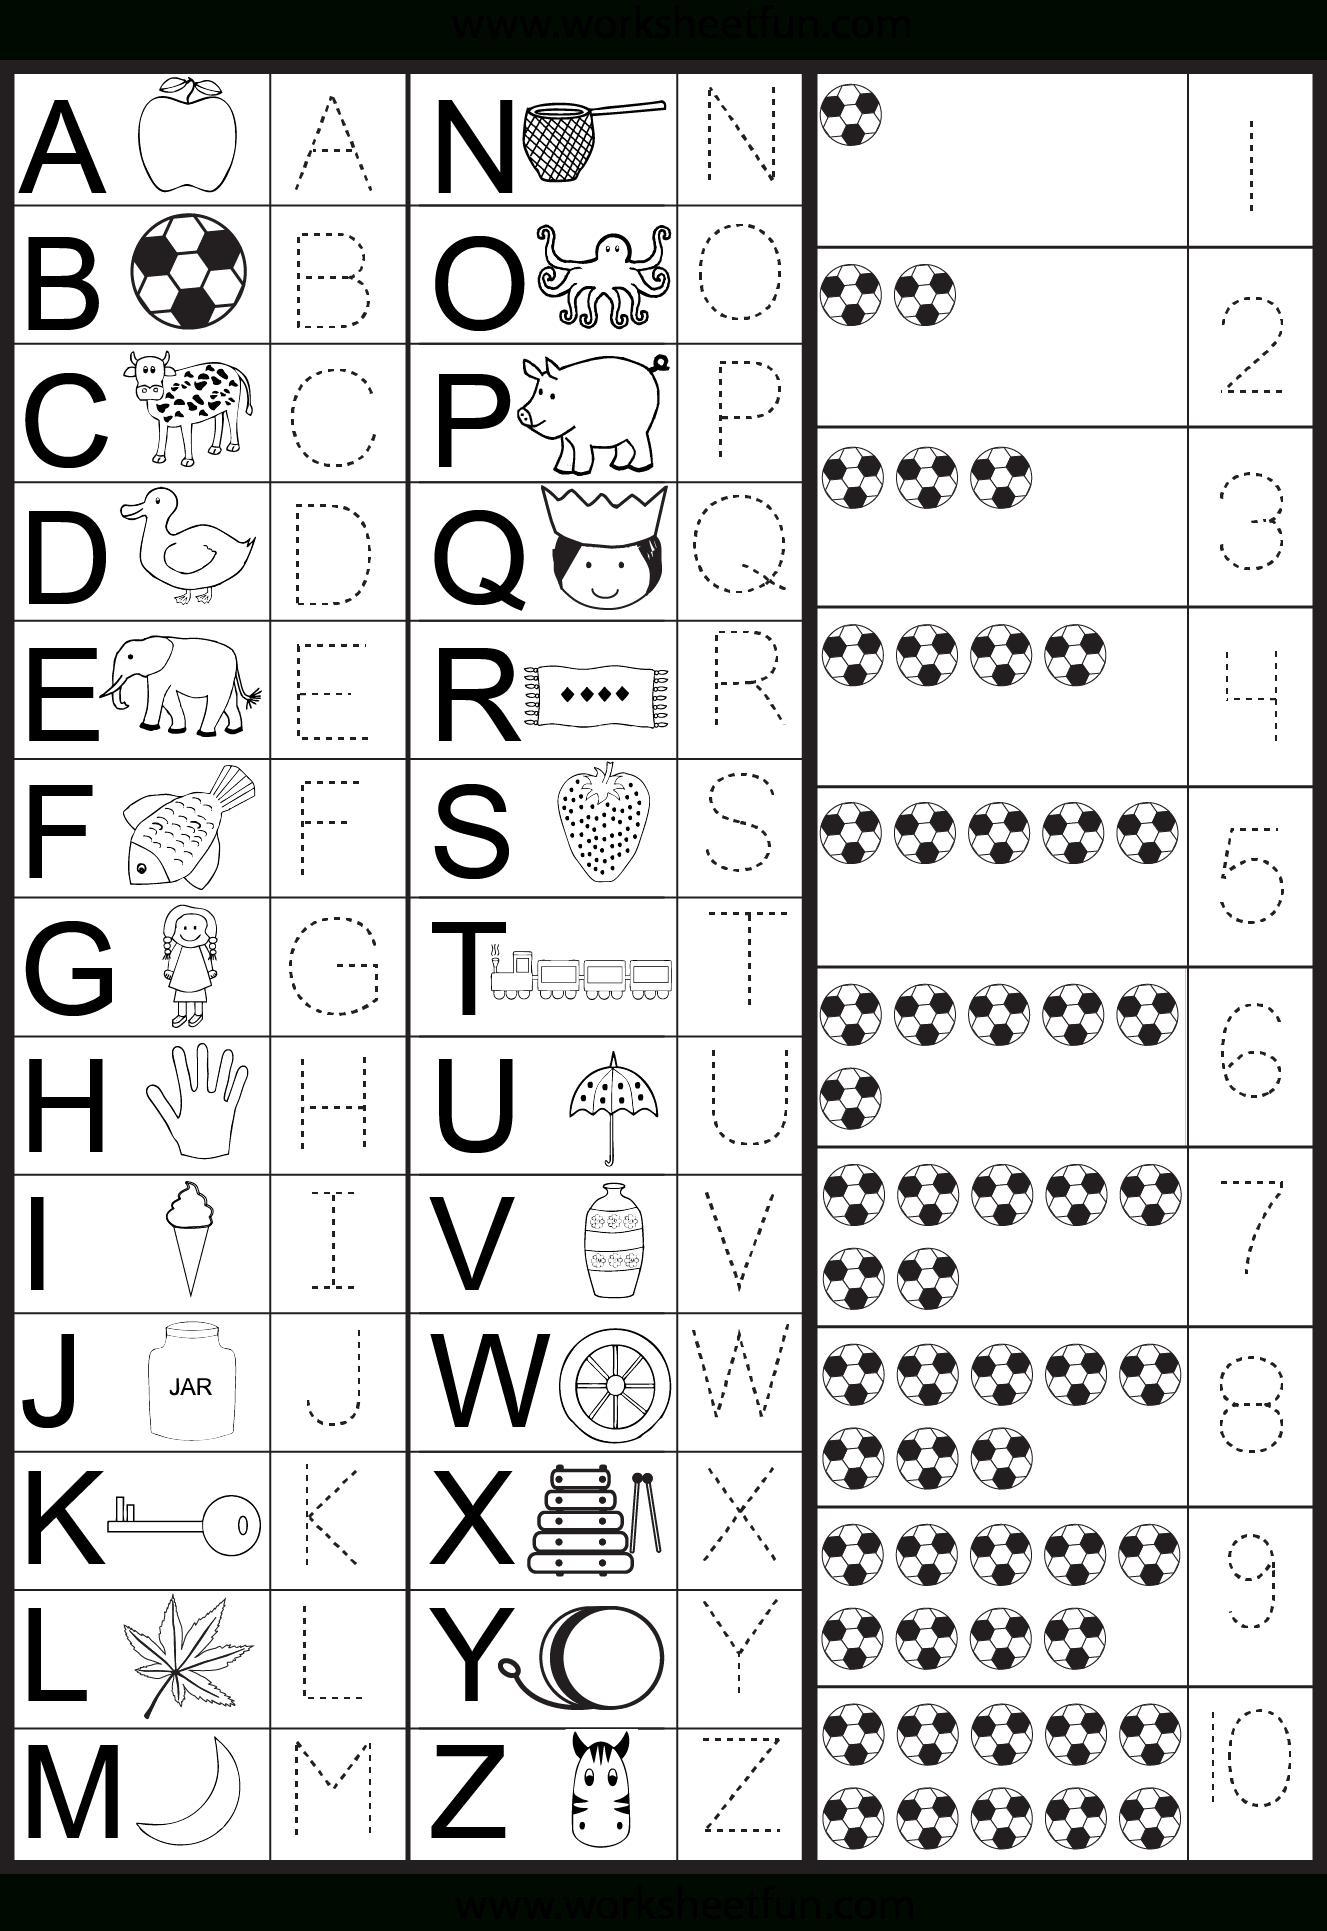 Free Tracing Ketters And Numbers | Letters And Numbers with Preschool Worksheets Tracing Letters And Numbers